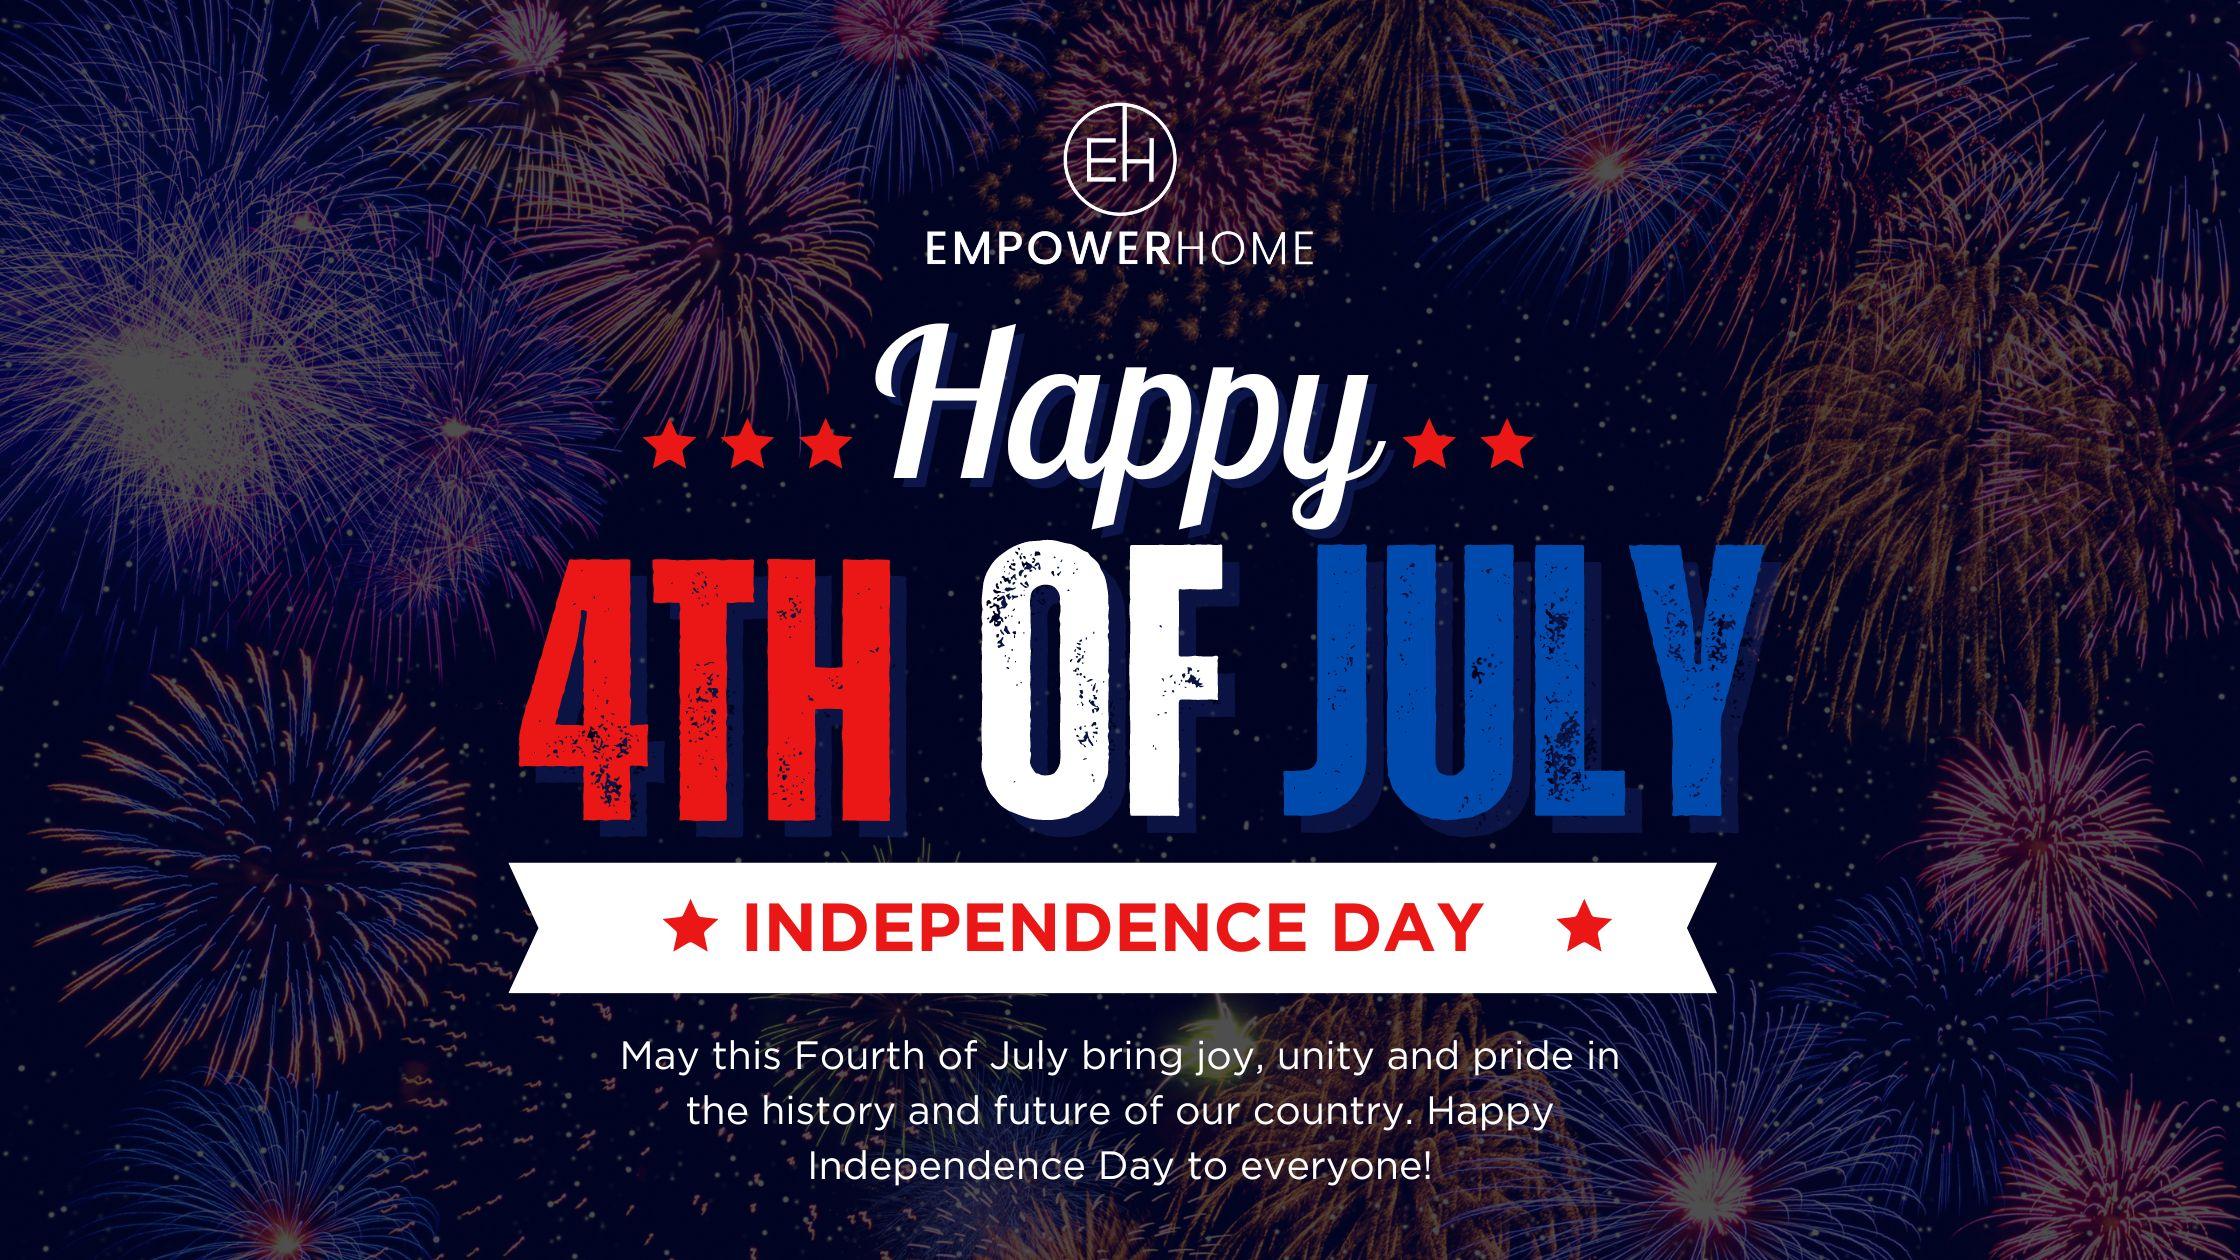 Happy 4th of July from EmpowerHome Team!